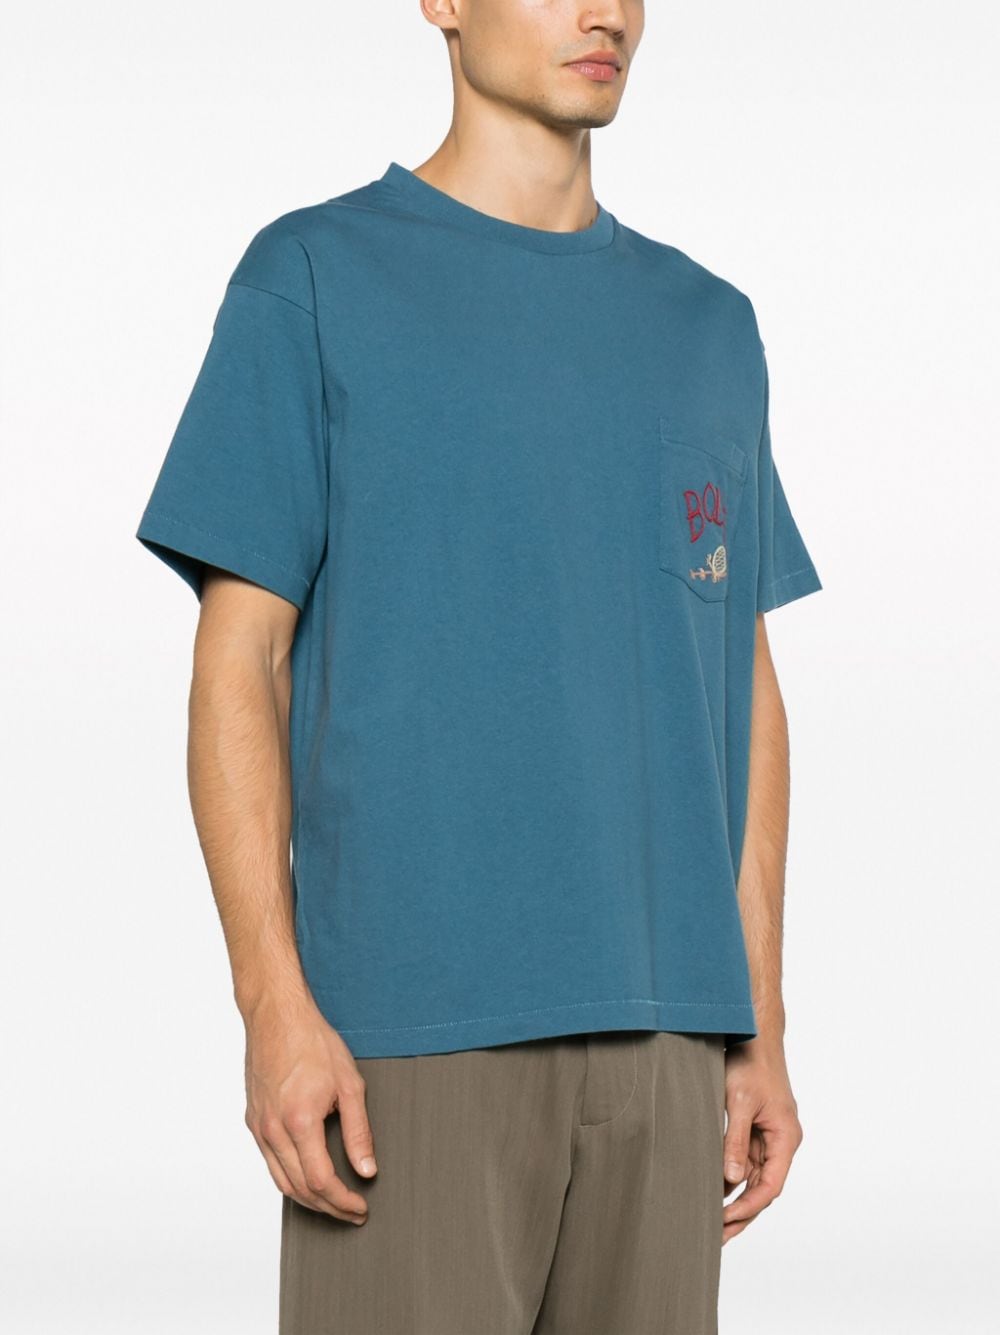 BODE BODE- Embroidered Cotton T-shirt